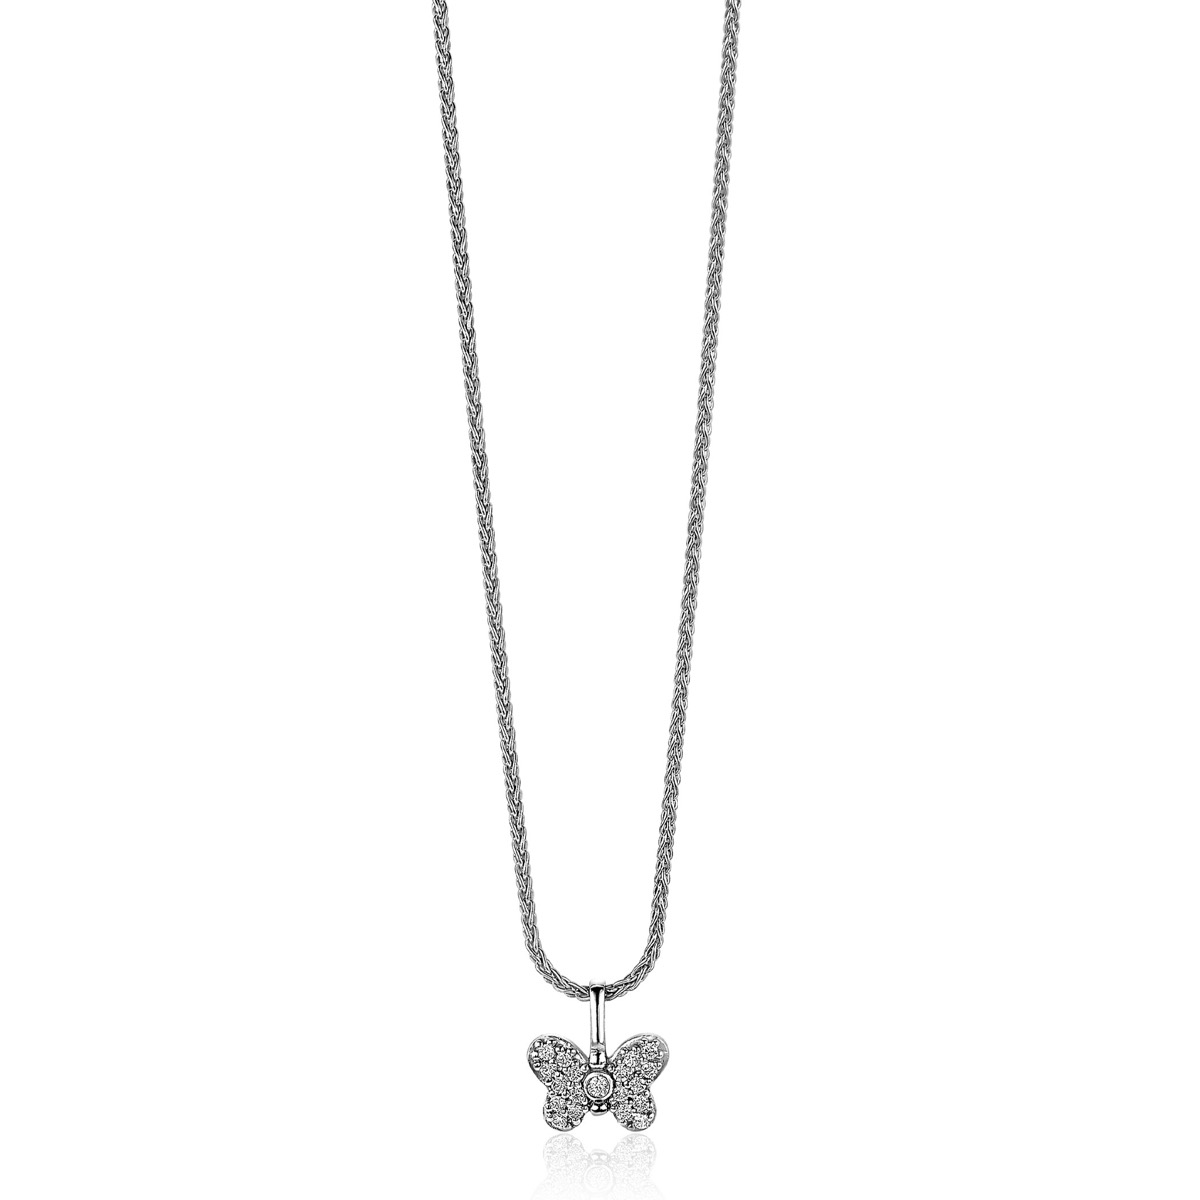 11mm ZINZI Sterling Silver Pendant Butterfly White Zirconias ZIH-BF48 (excl. necklace)